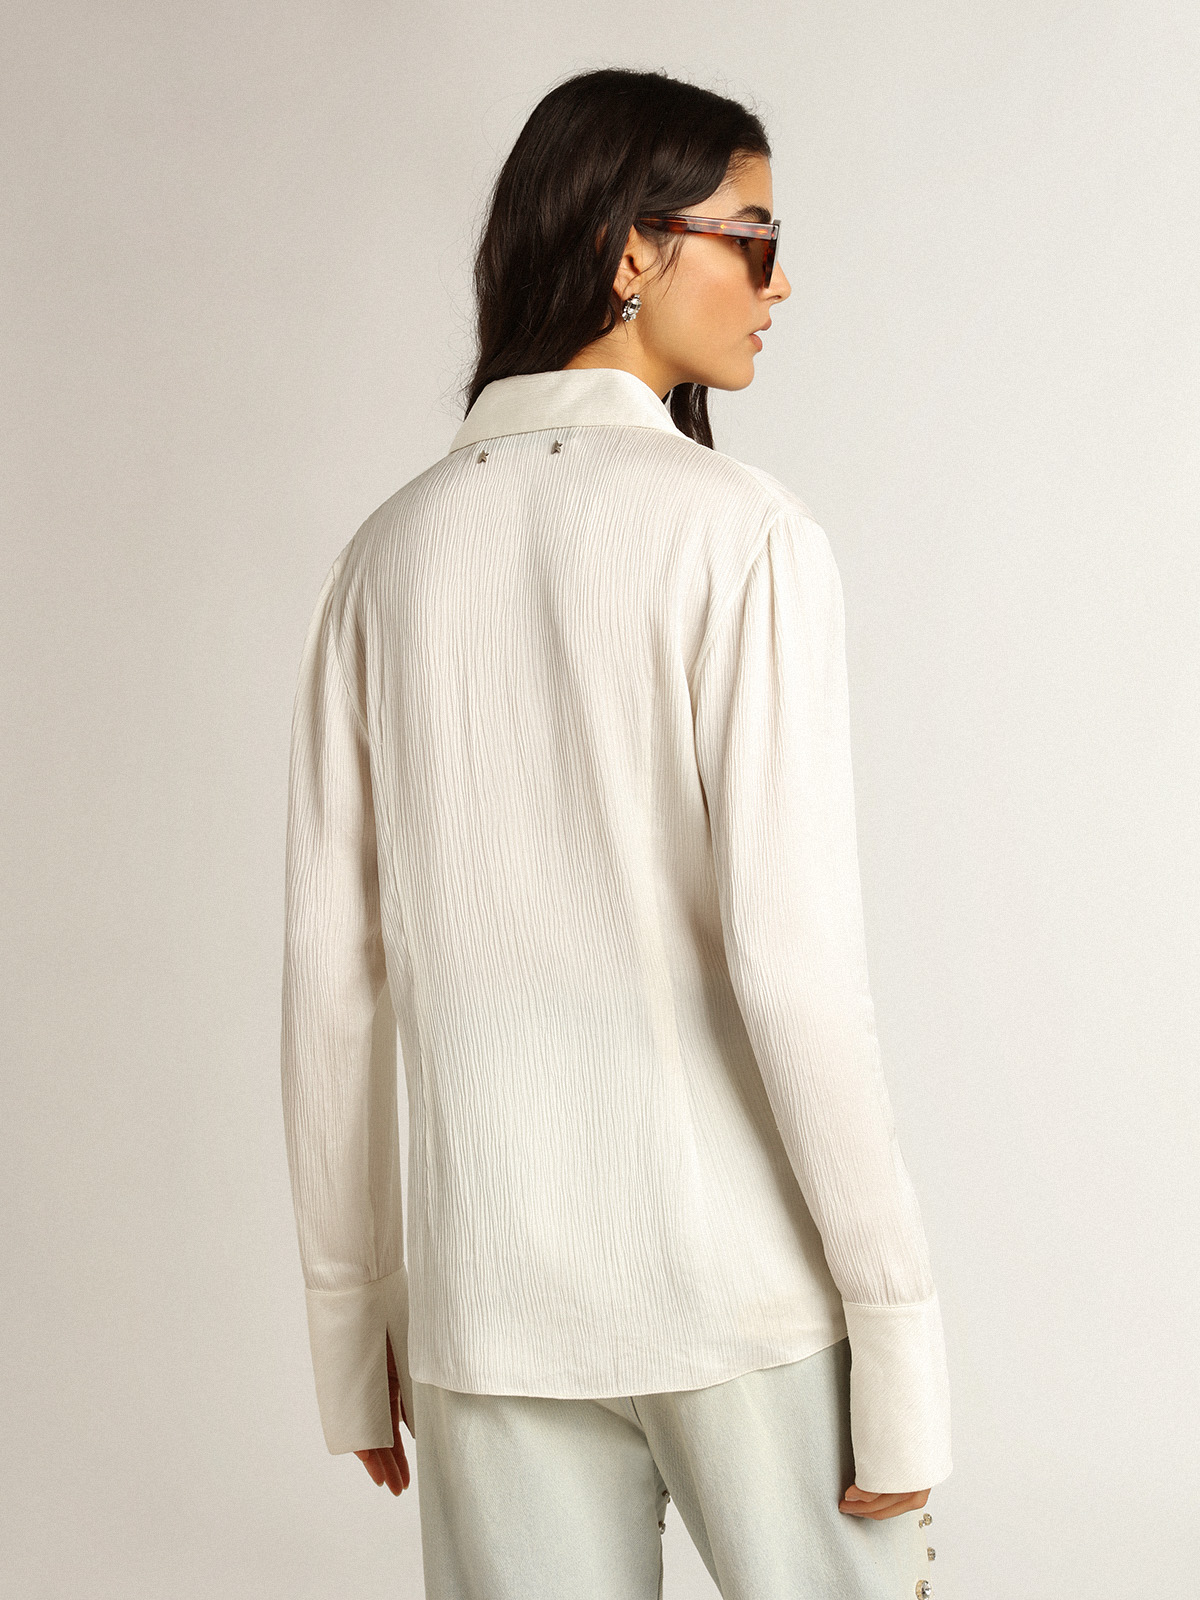 Golden Goose Fitted Shirt Gigi in Offwhite S